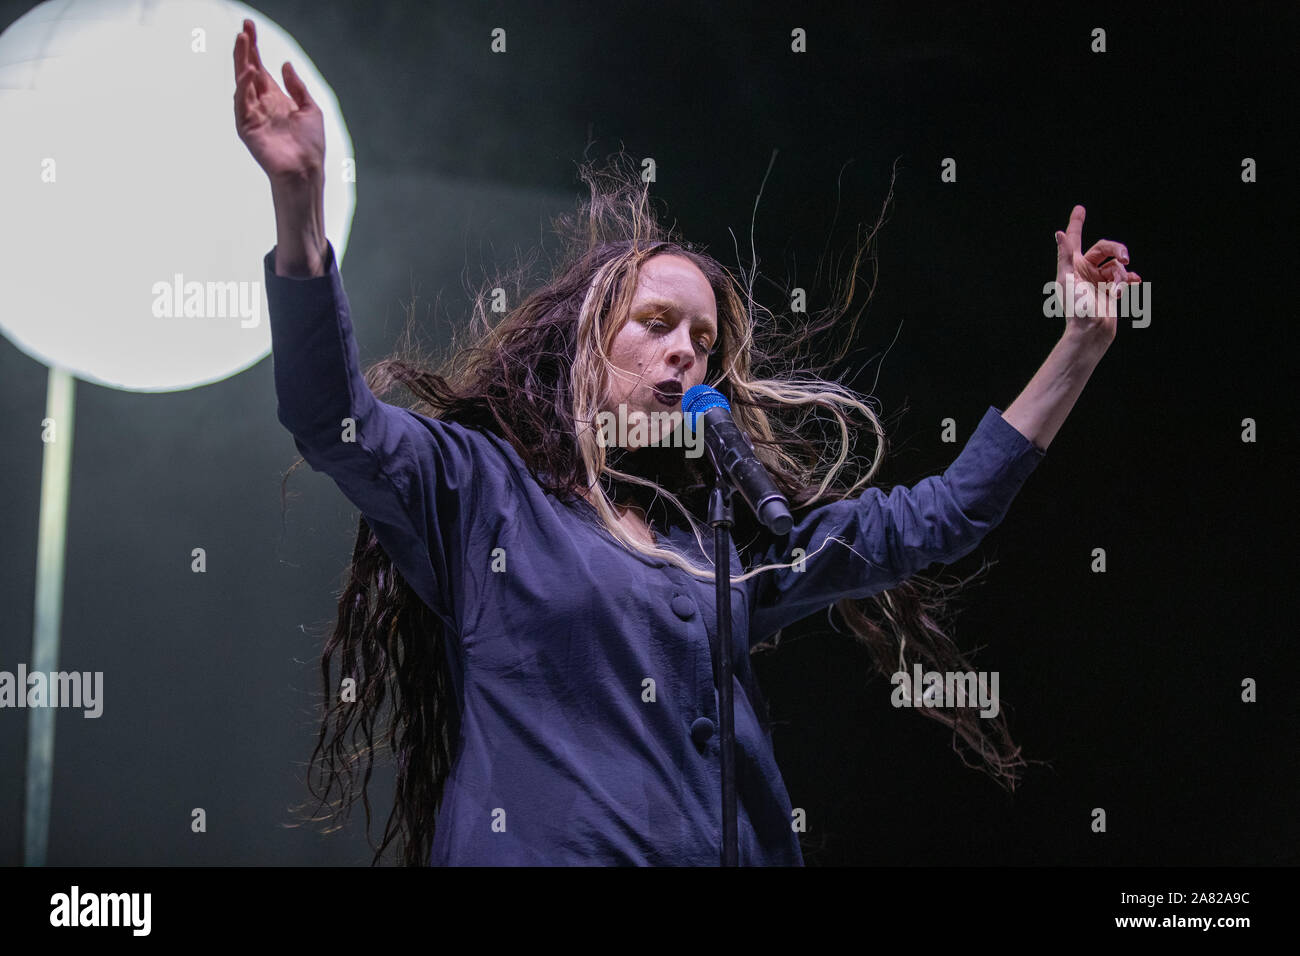 Brighton, UK. 5 Nov 2019, Alexandra Ashley Hughes, known by her stage name Allie X supporting Marina  on stage at the Brighton Centre   Credit: Jason Richardson/Alamy Live News Stock Photo